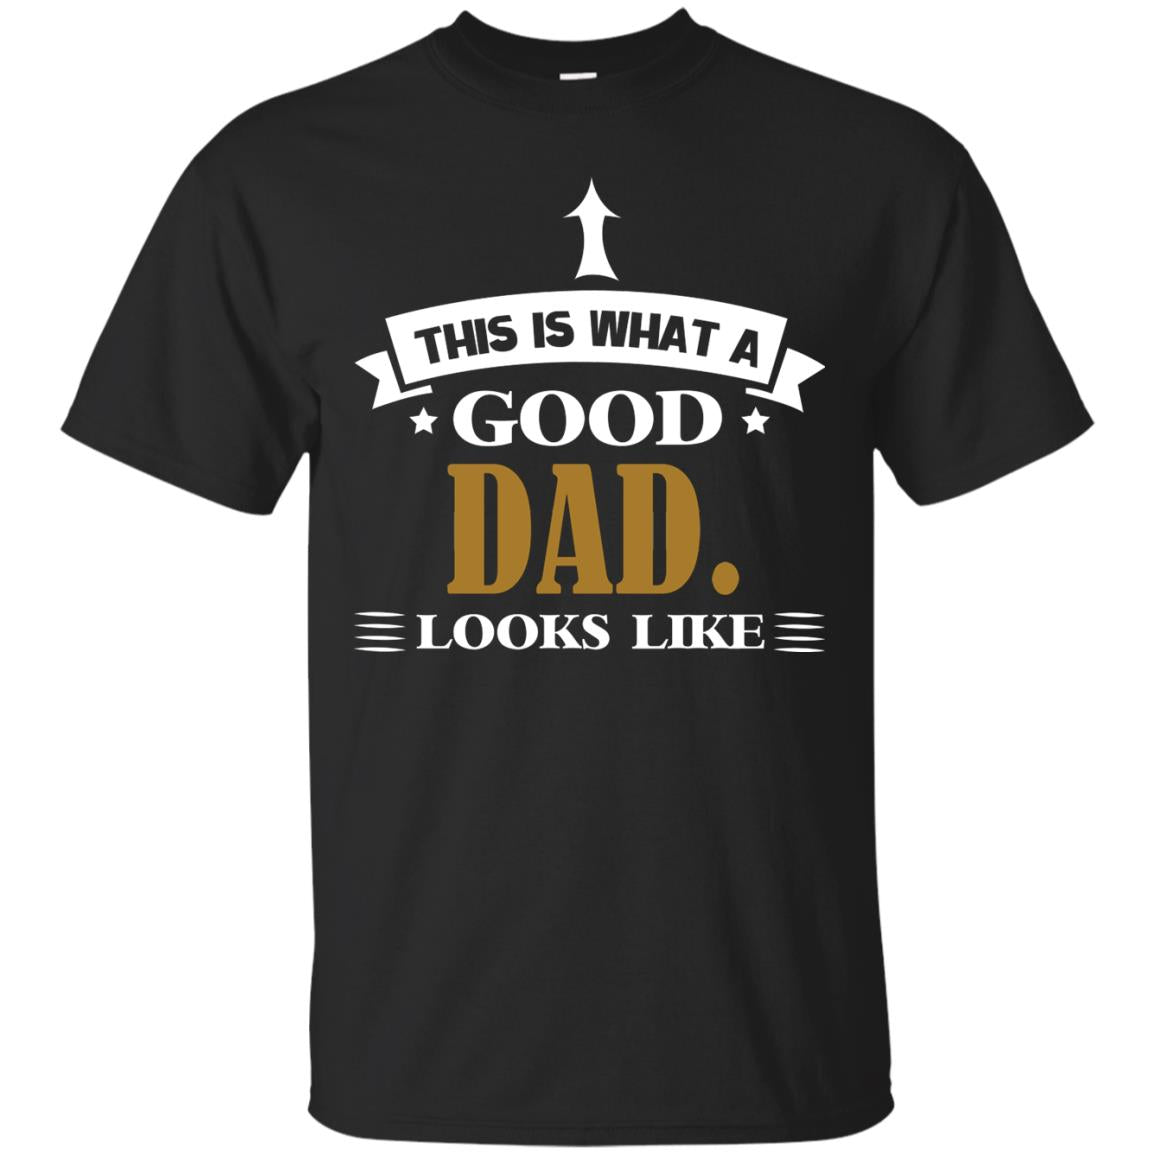 This Is What A Good Dad Look Like Shirt For Father's DayG200 Gildan Ultra Cotton T-Shirt